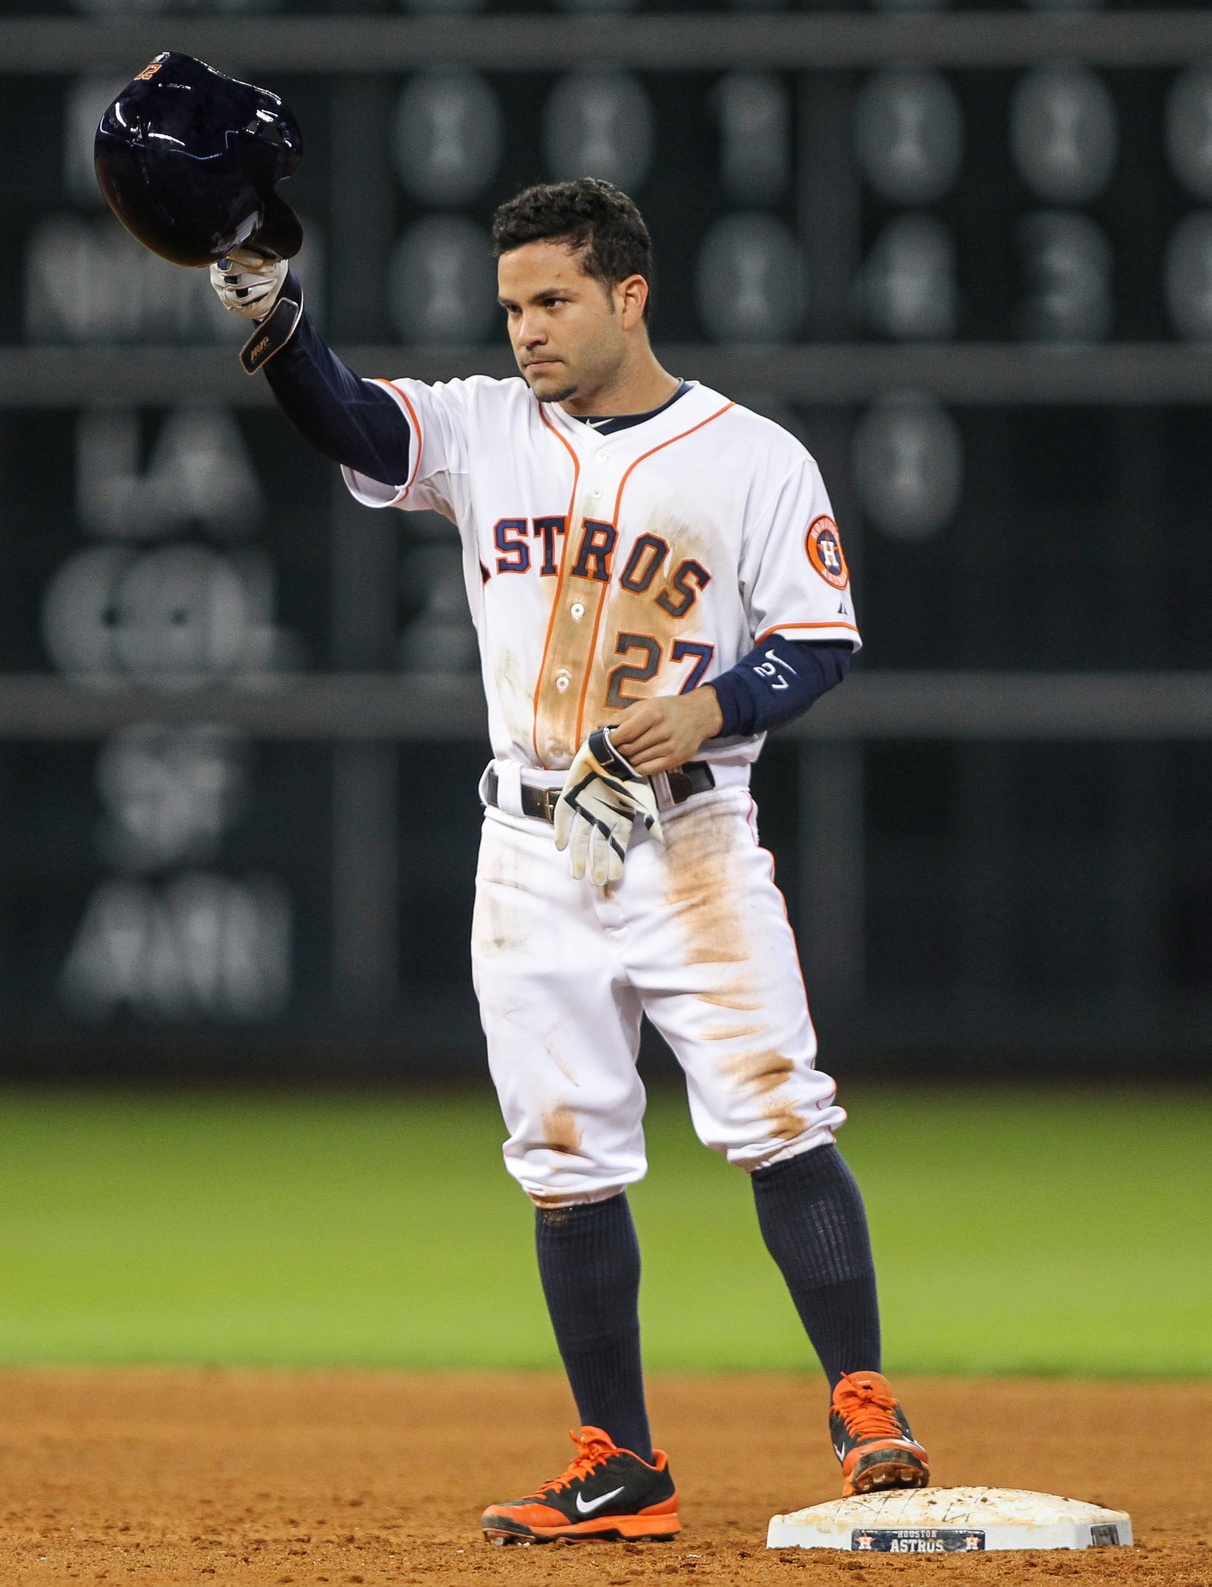 Jose Altuve wins first batting title in Astros' history